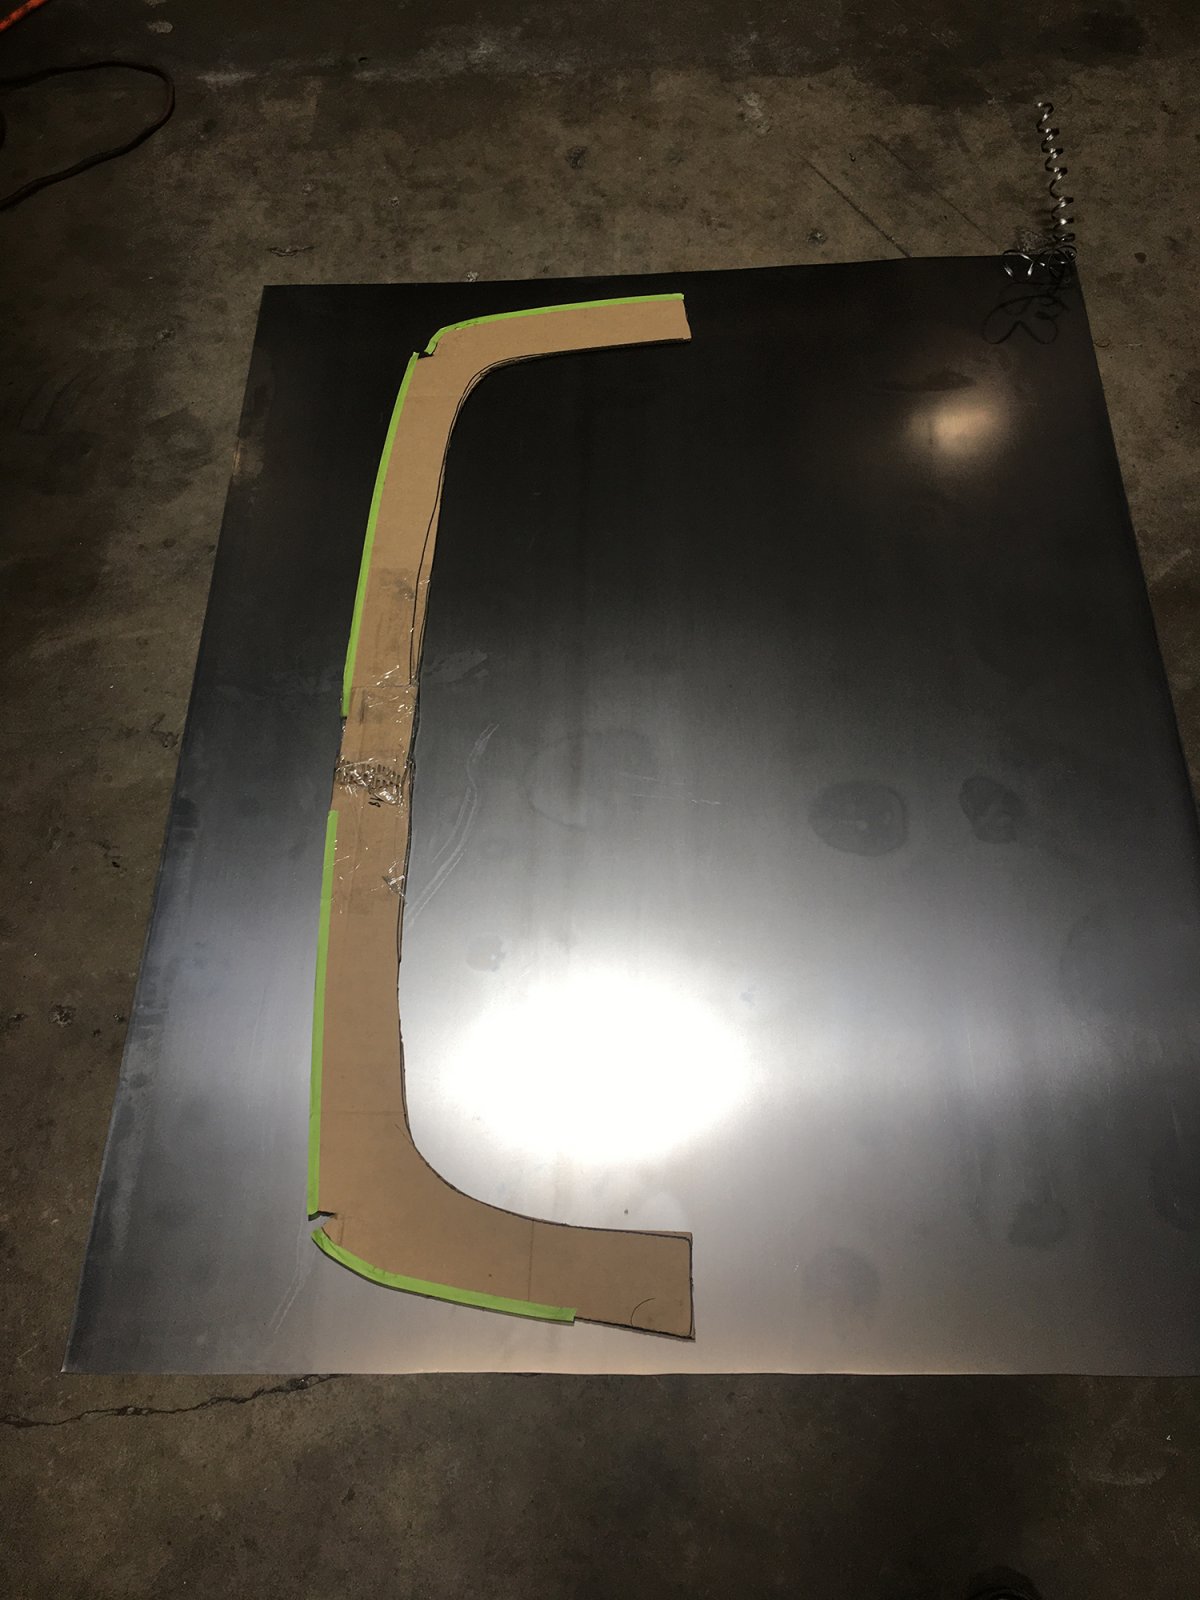 He then traced it to a sheet of steel, then cut the shape. Just like in 2nd grade art class, but don’t tell that to Tyler.